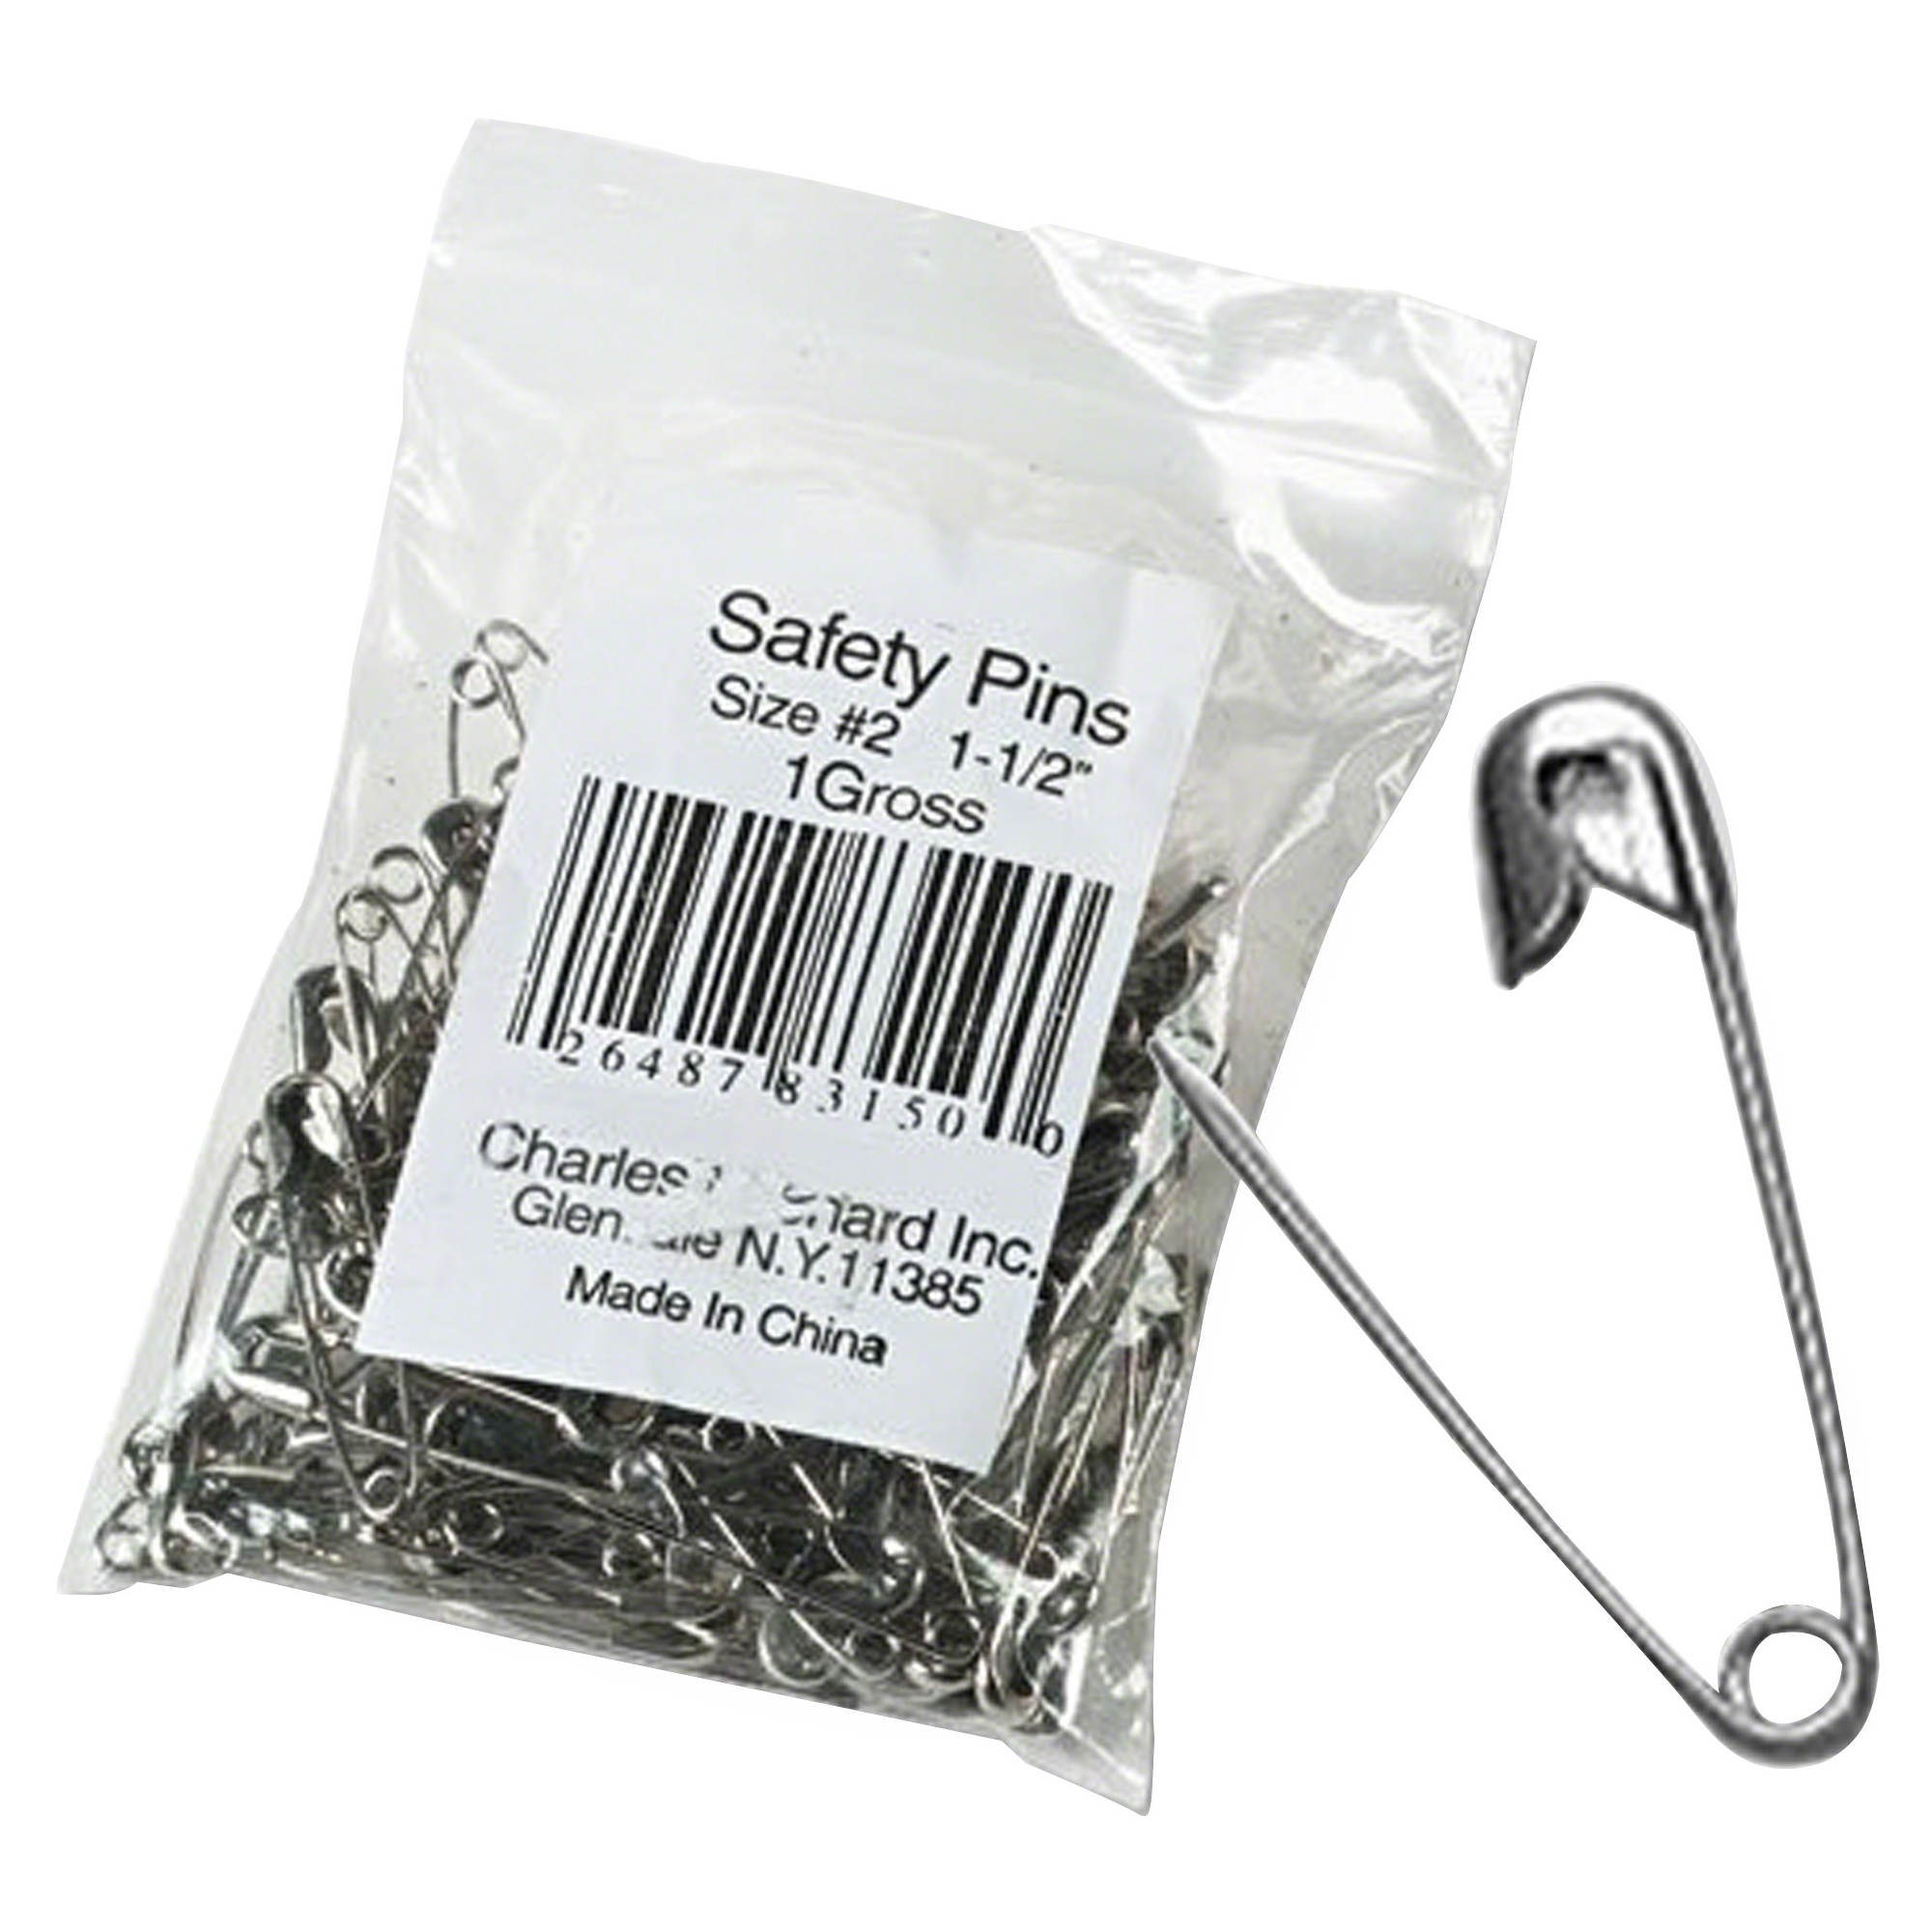 CLI, LEO83150, Safety Pins, 144 / Pack, Silver - image 2 of 2